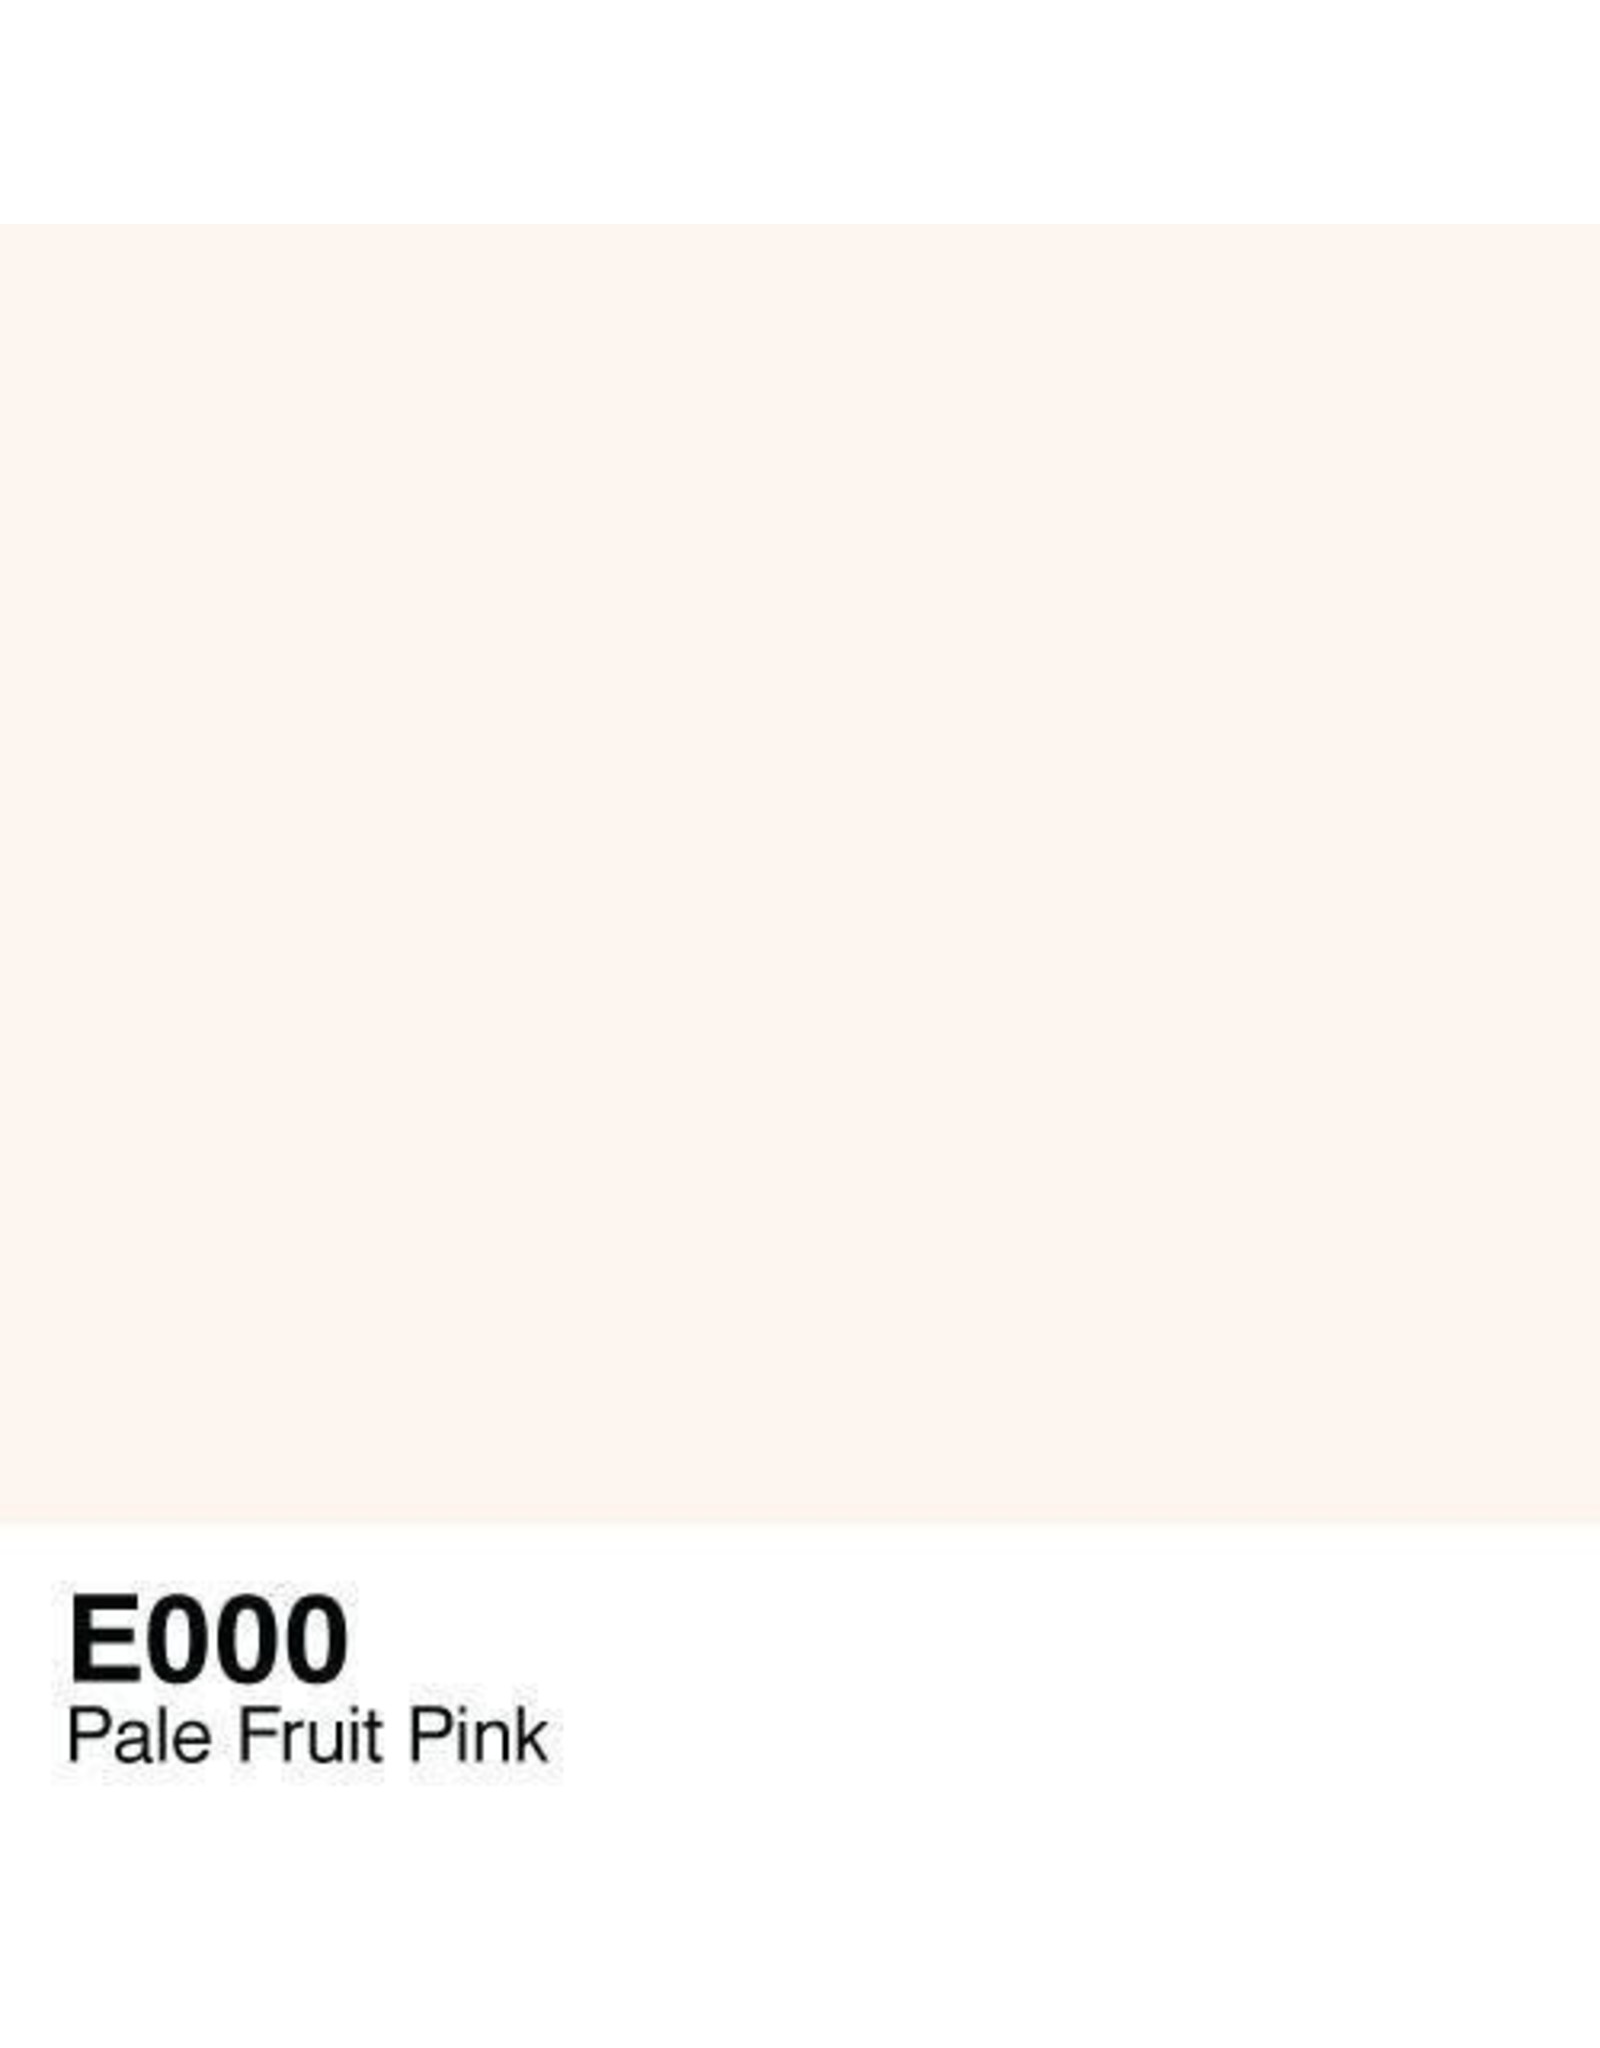 COPIC COPIC E000 PALE FRUIT PINK SKETCH MARKER